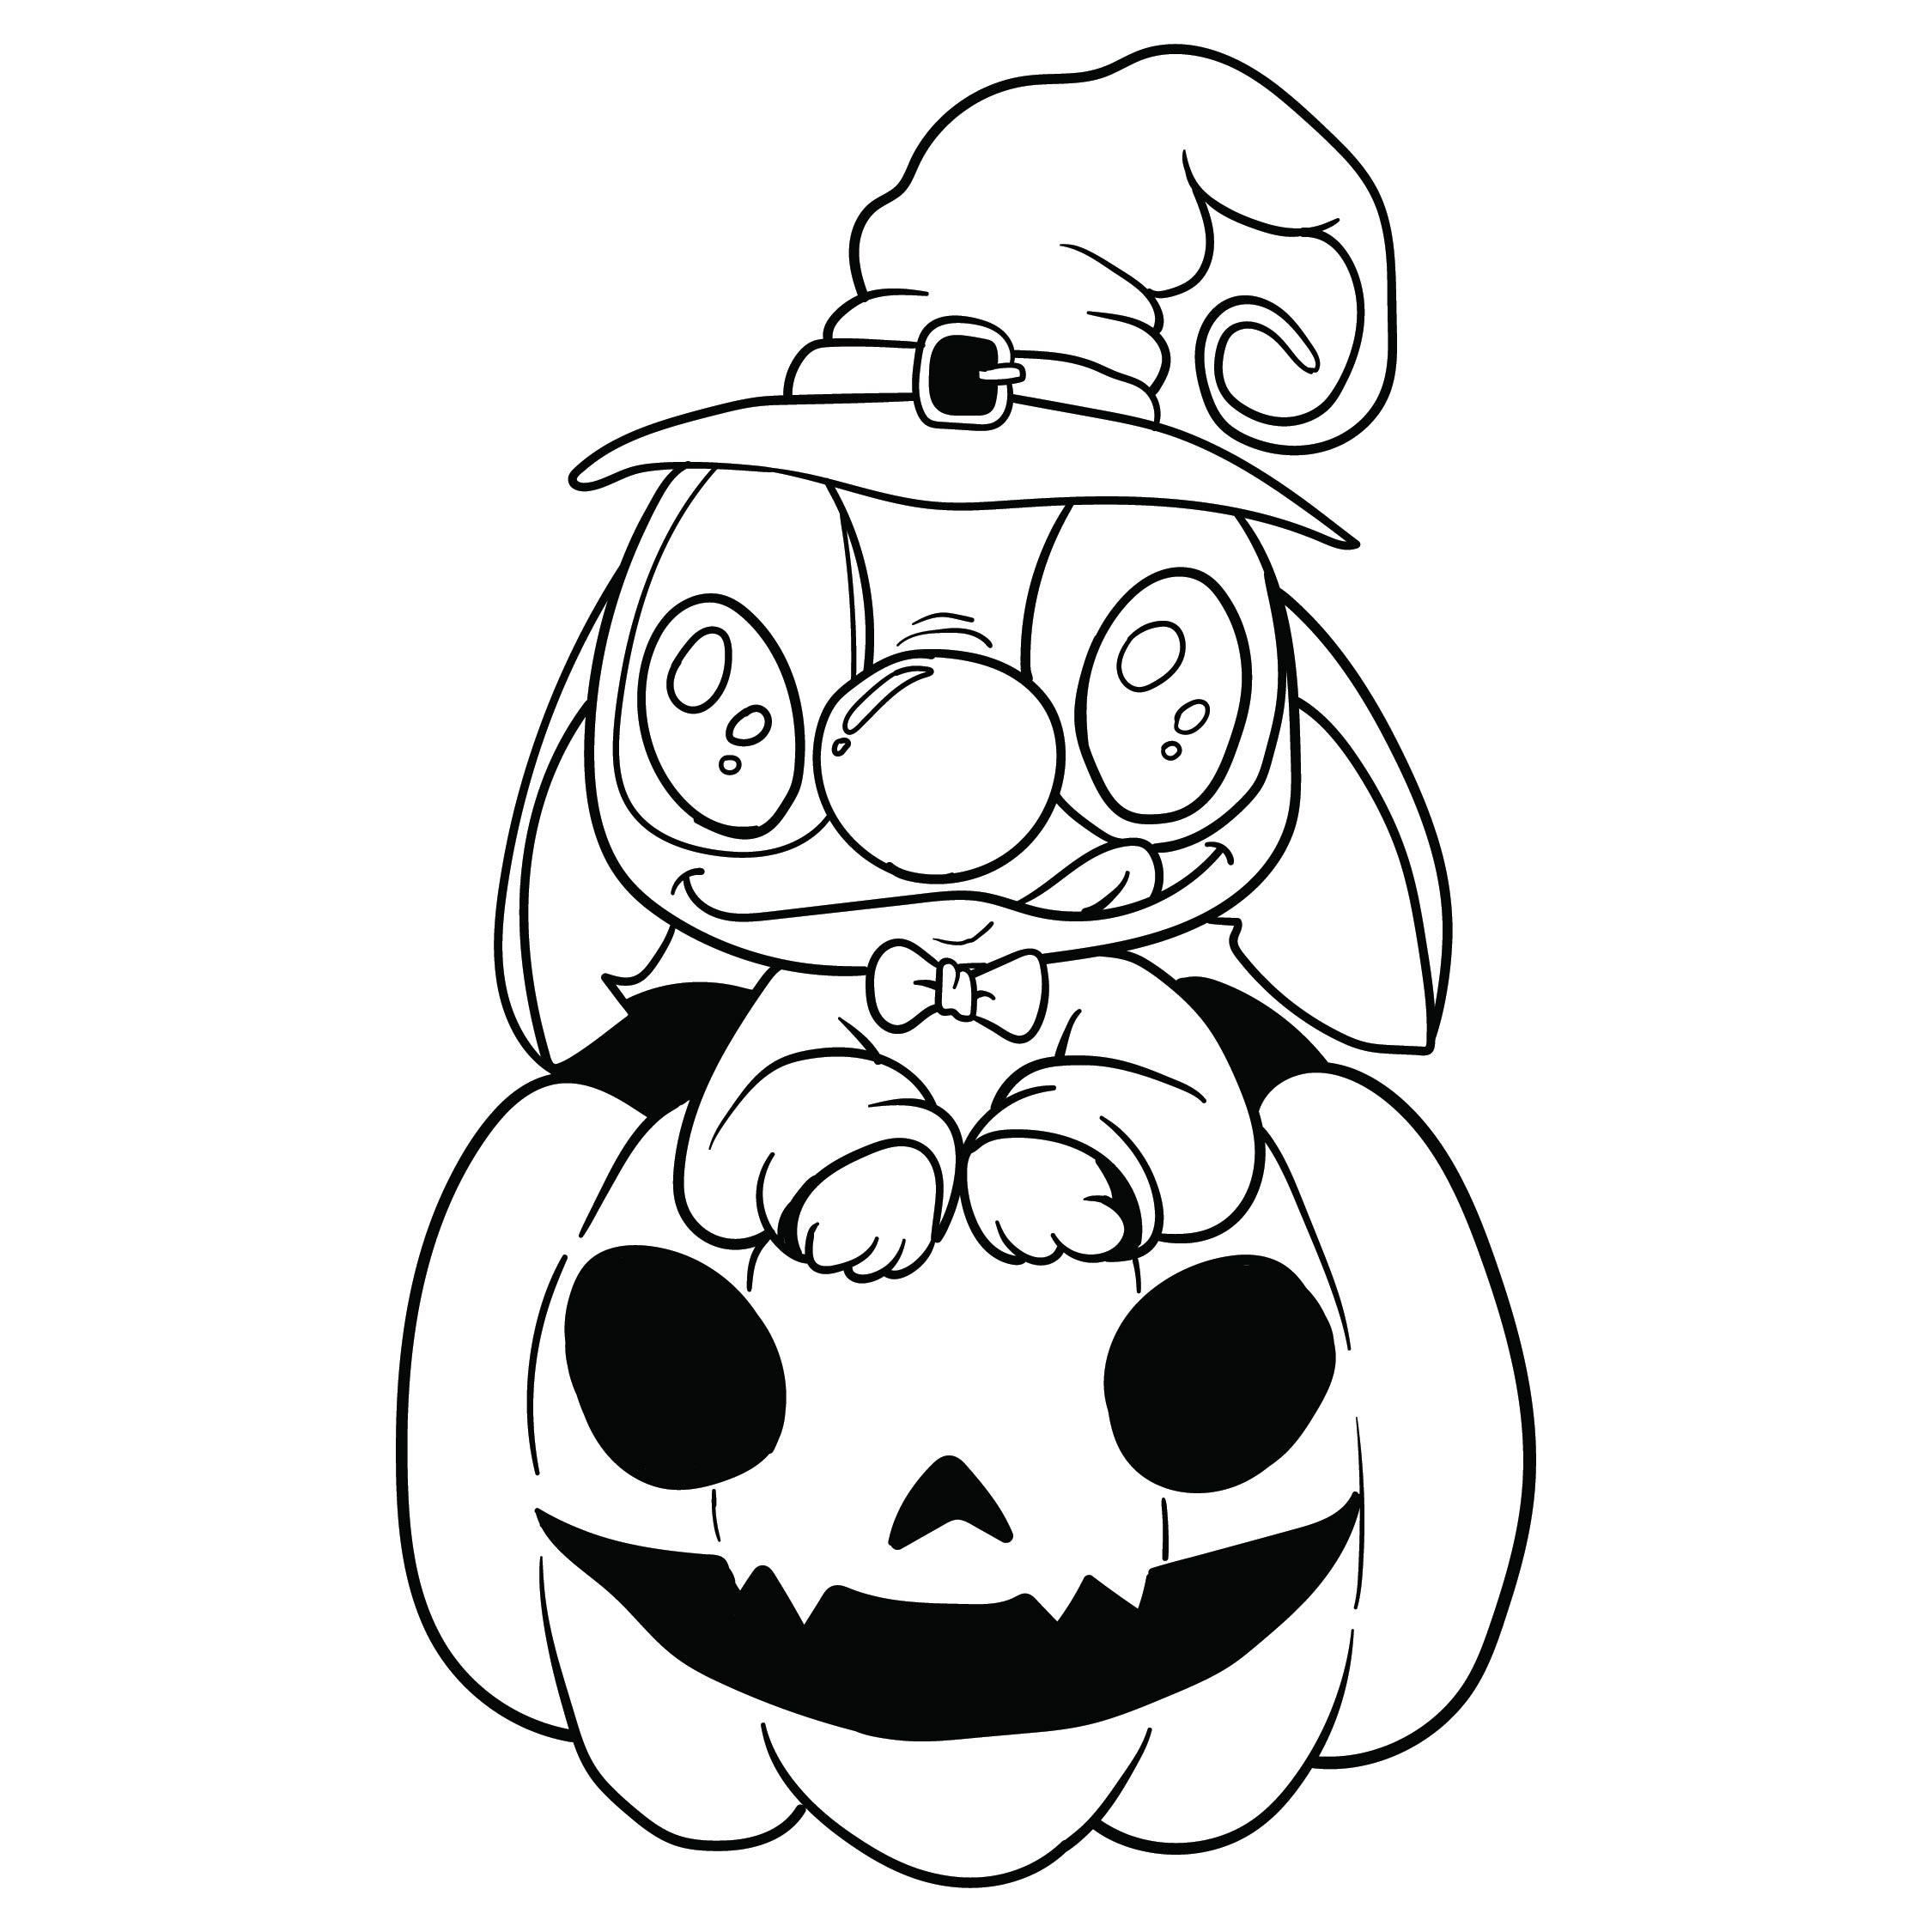 Disney Halloween Printable Coloring Pages - Printable Word Searches